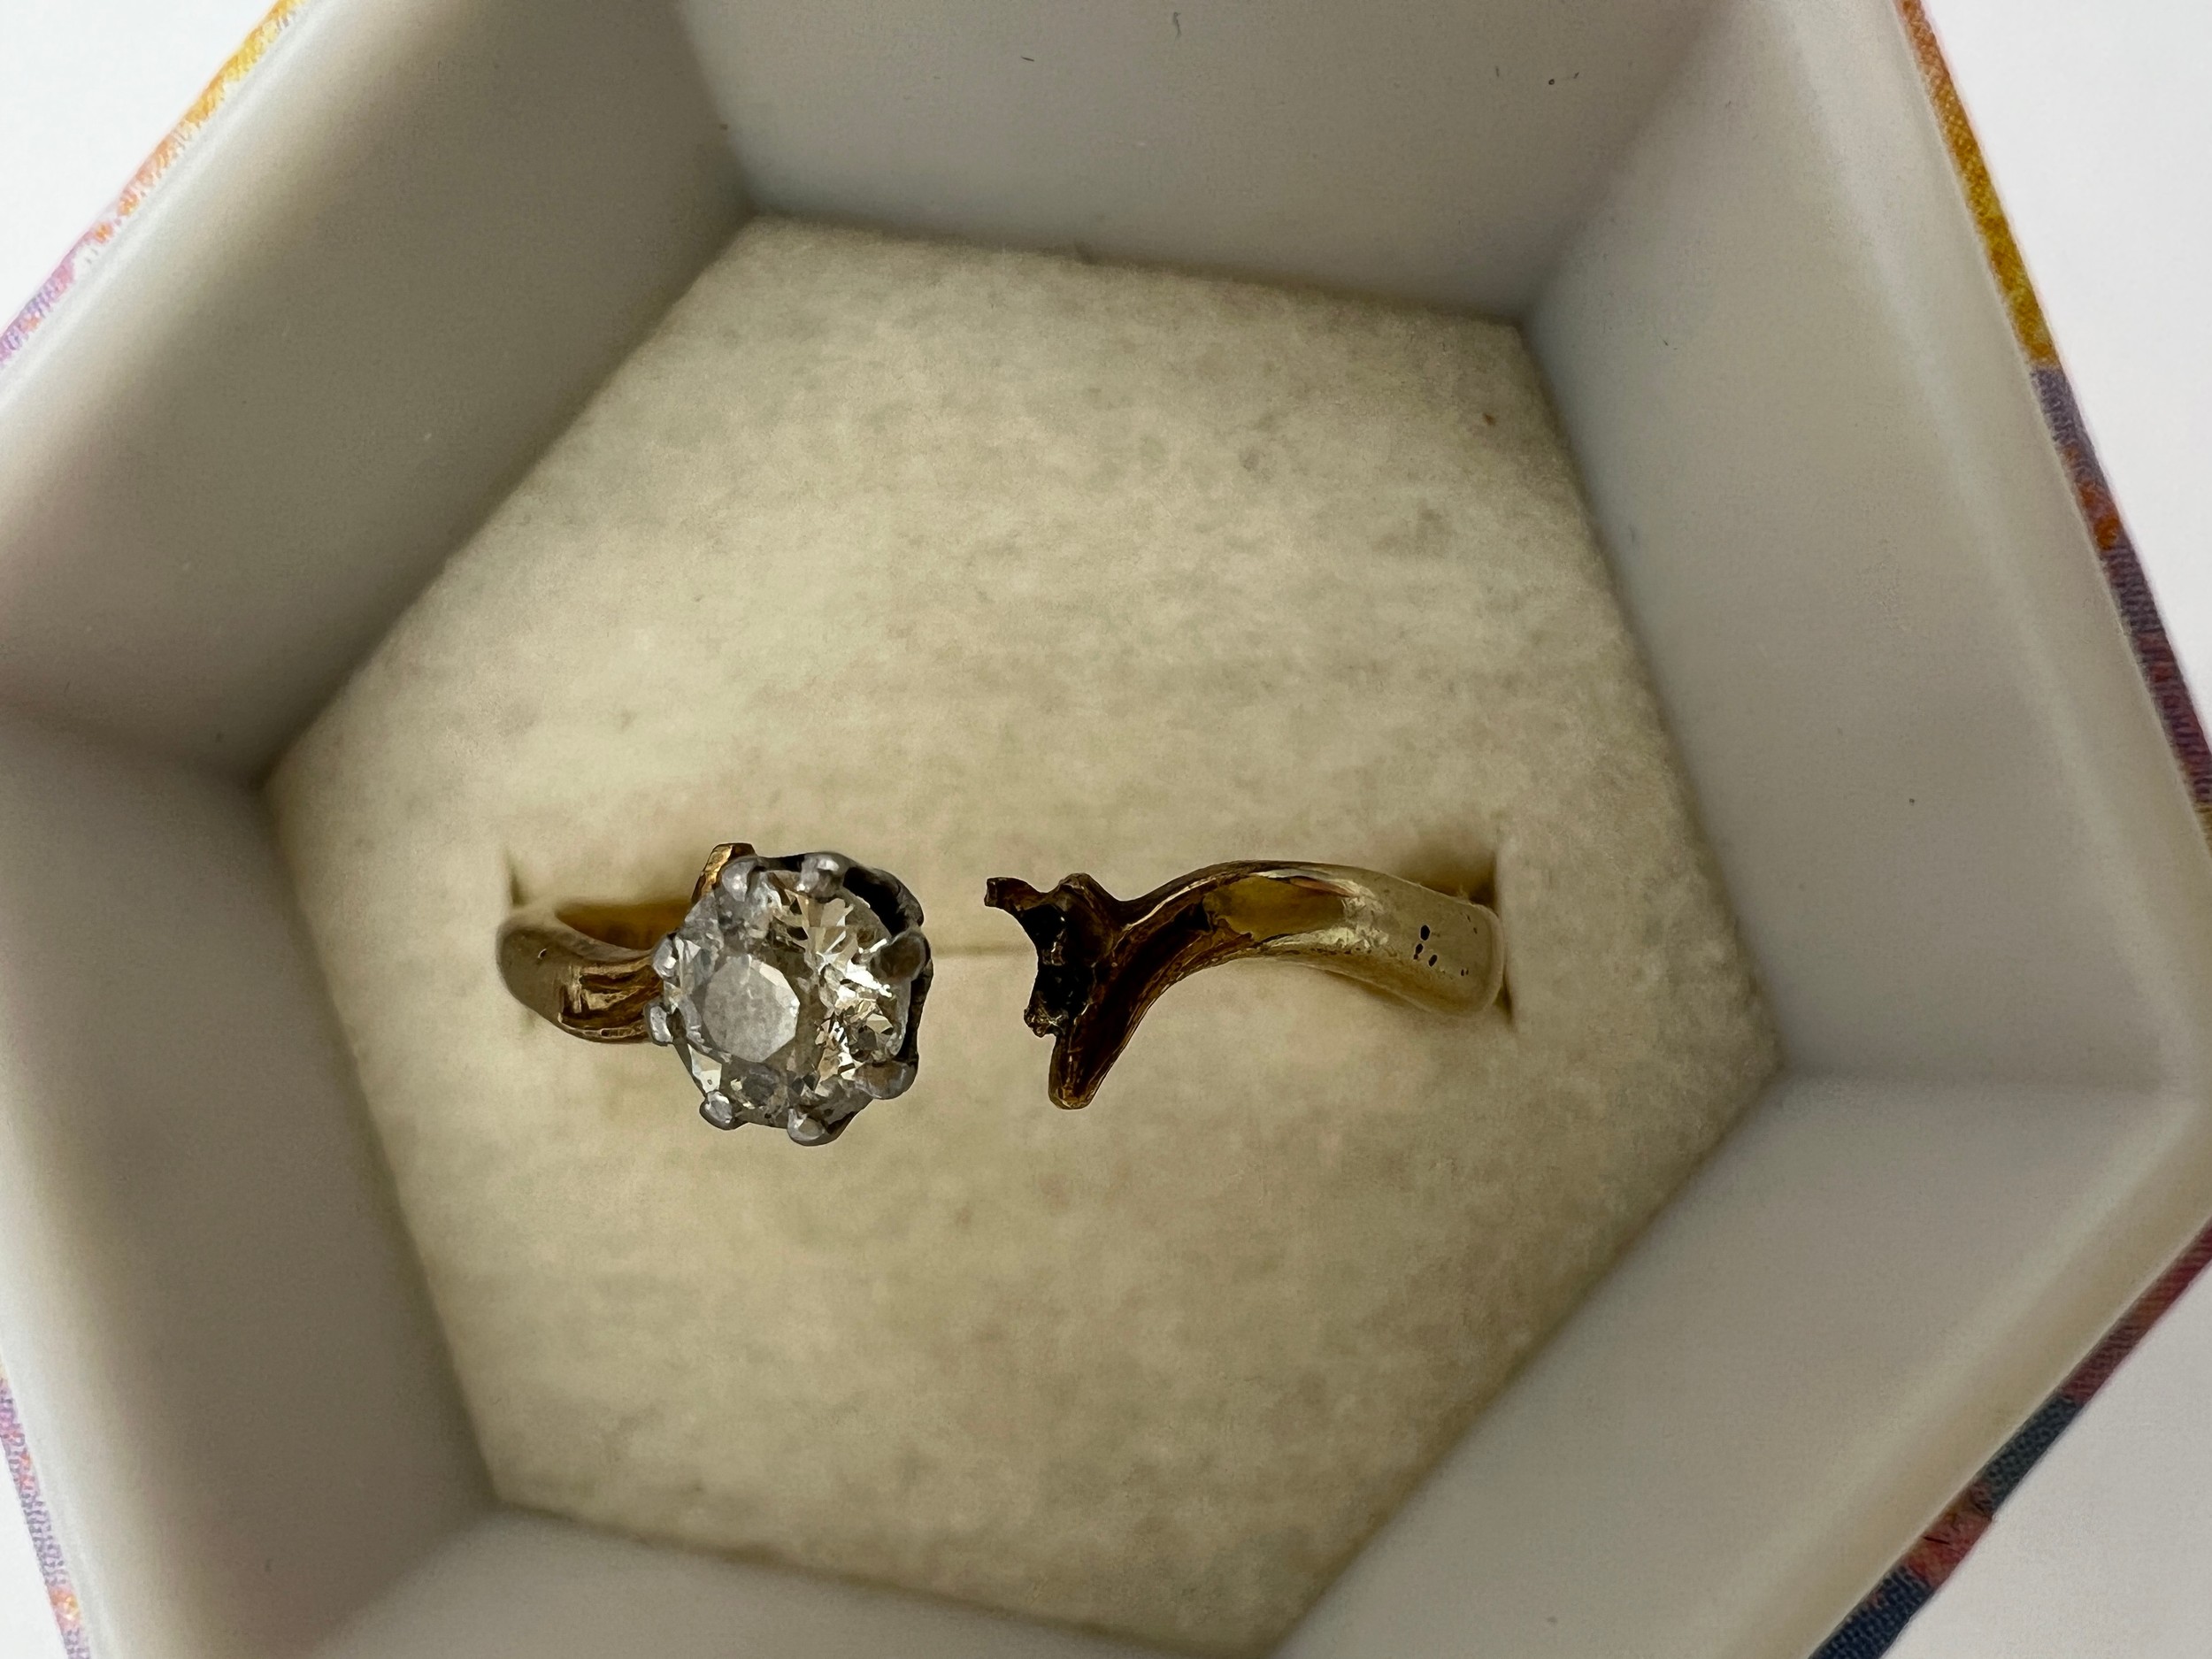 A solitaire diamond ring set in 18 carat yellow gold. Weight 1.6gm. - Image 2 of 2